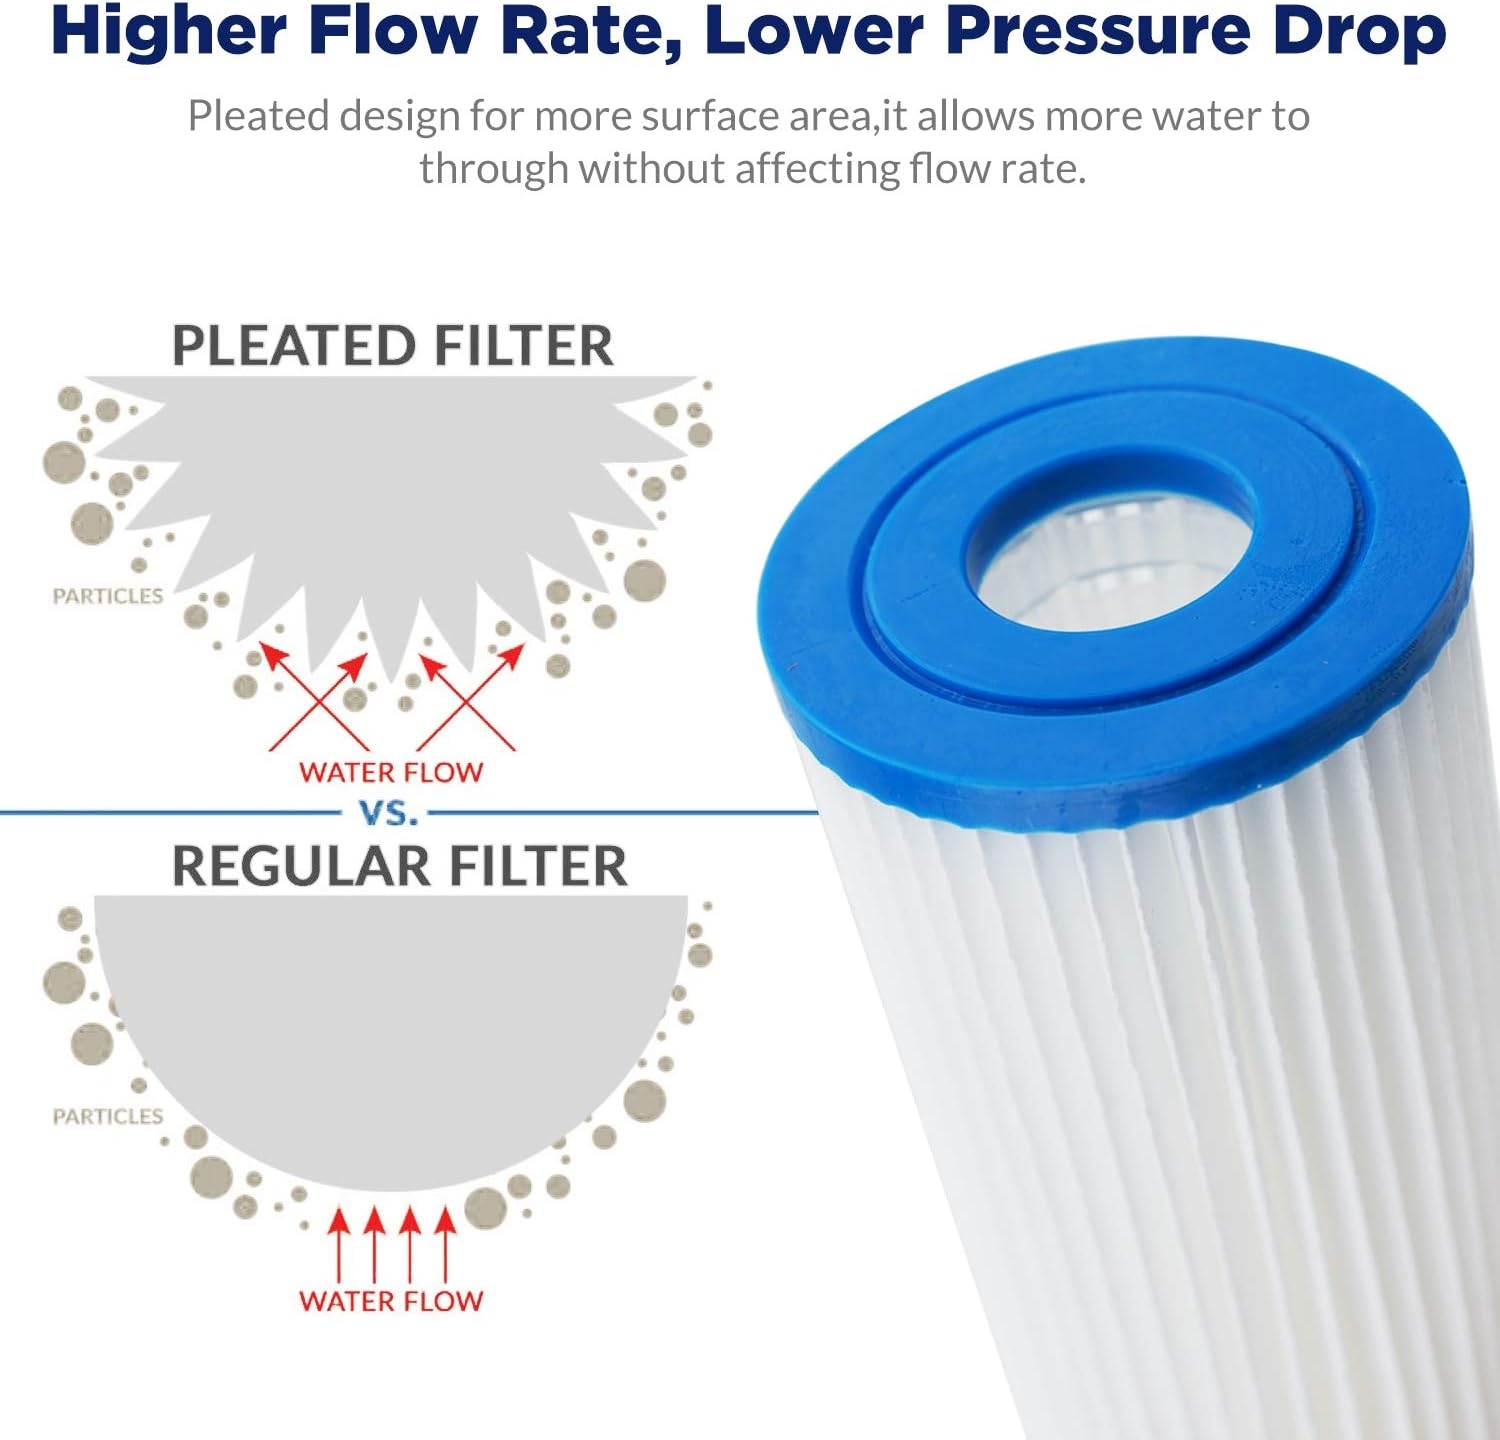 Membrane Solutions 5 Micron Pleated Polyester Sediment Water Filter 10"x2.5" Replacement Cartridge Universal Whole House Pre-Filter Compatible with W50PE, WFPFC3002, SPC-25-1050, FM-50-975 - 4 Pack